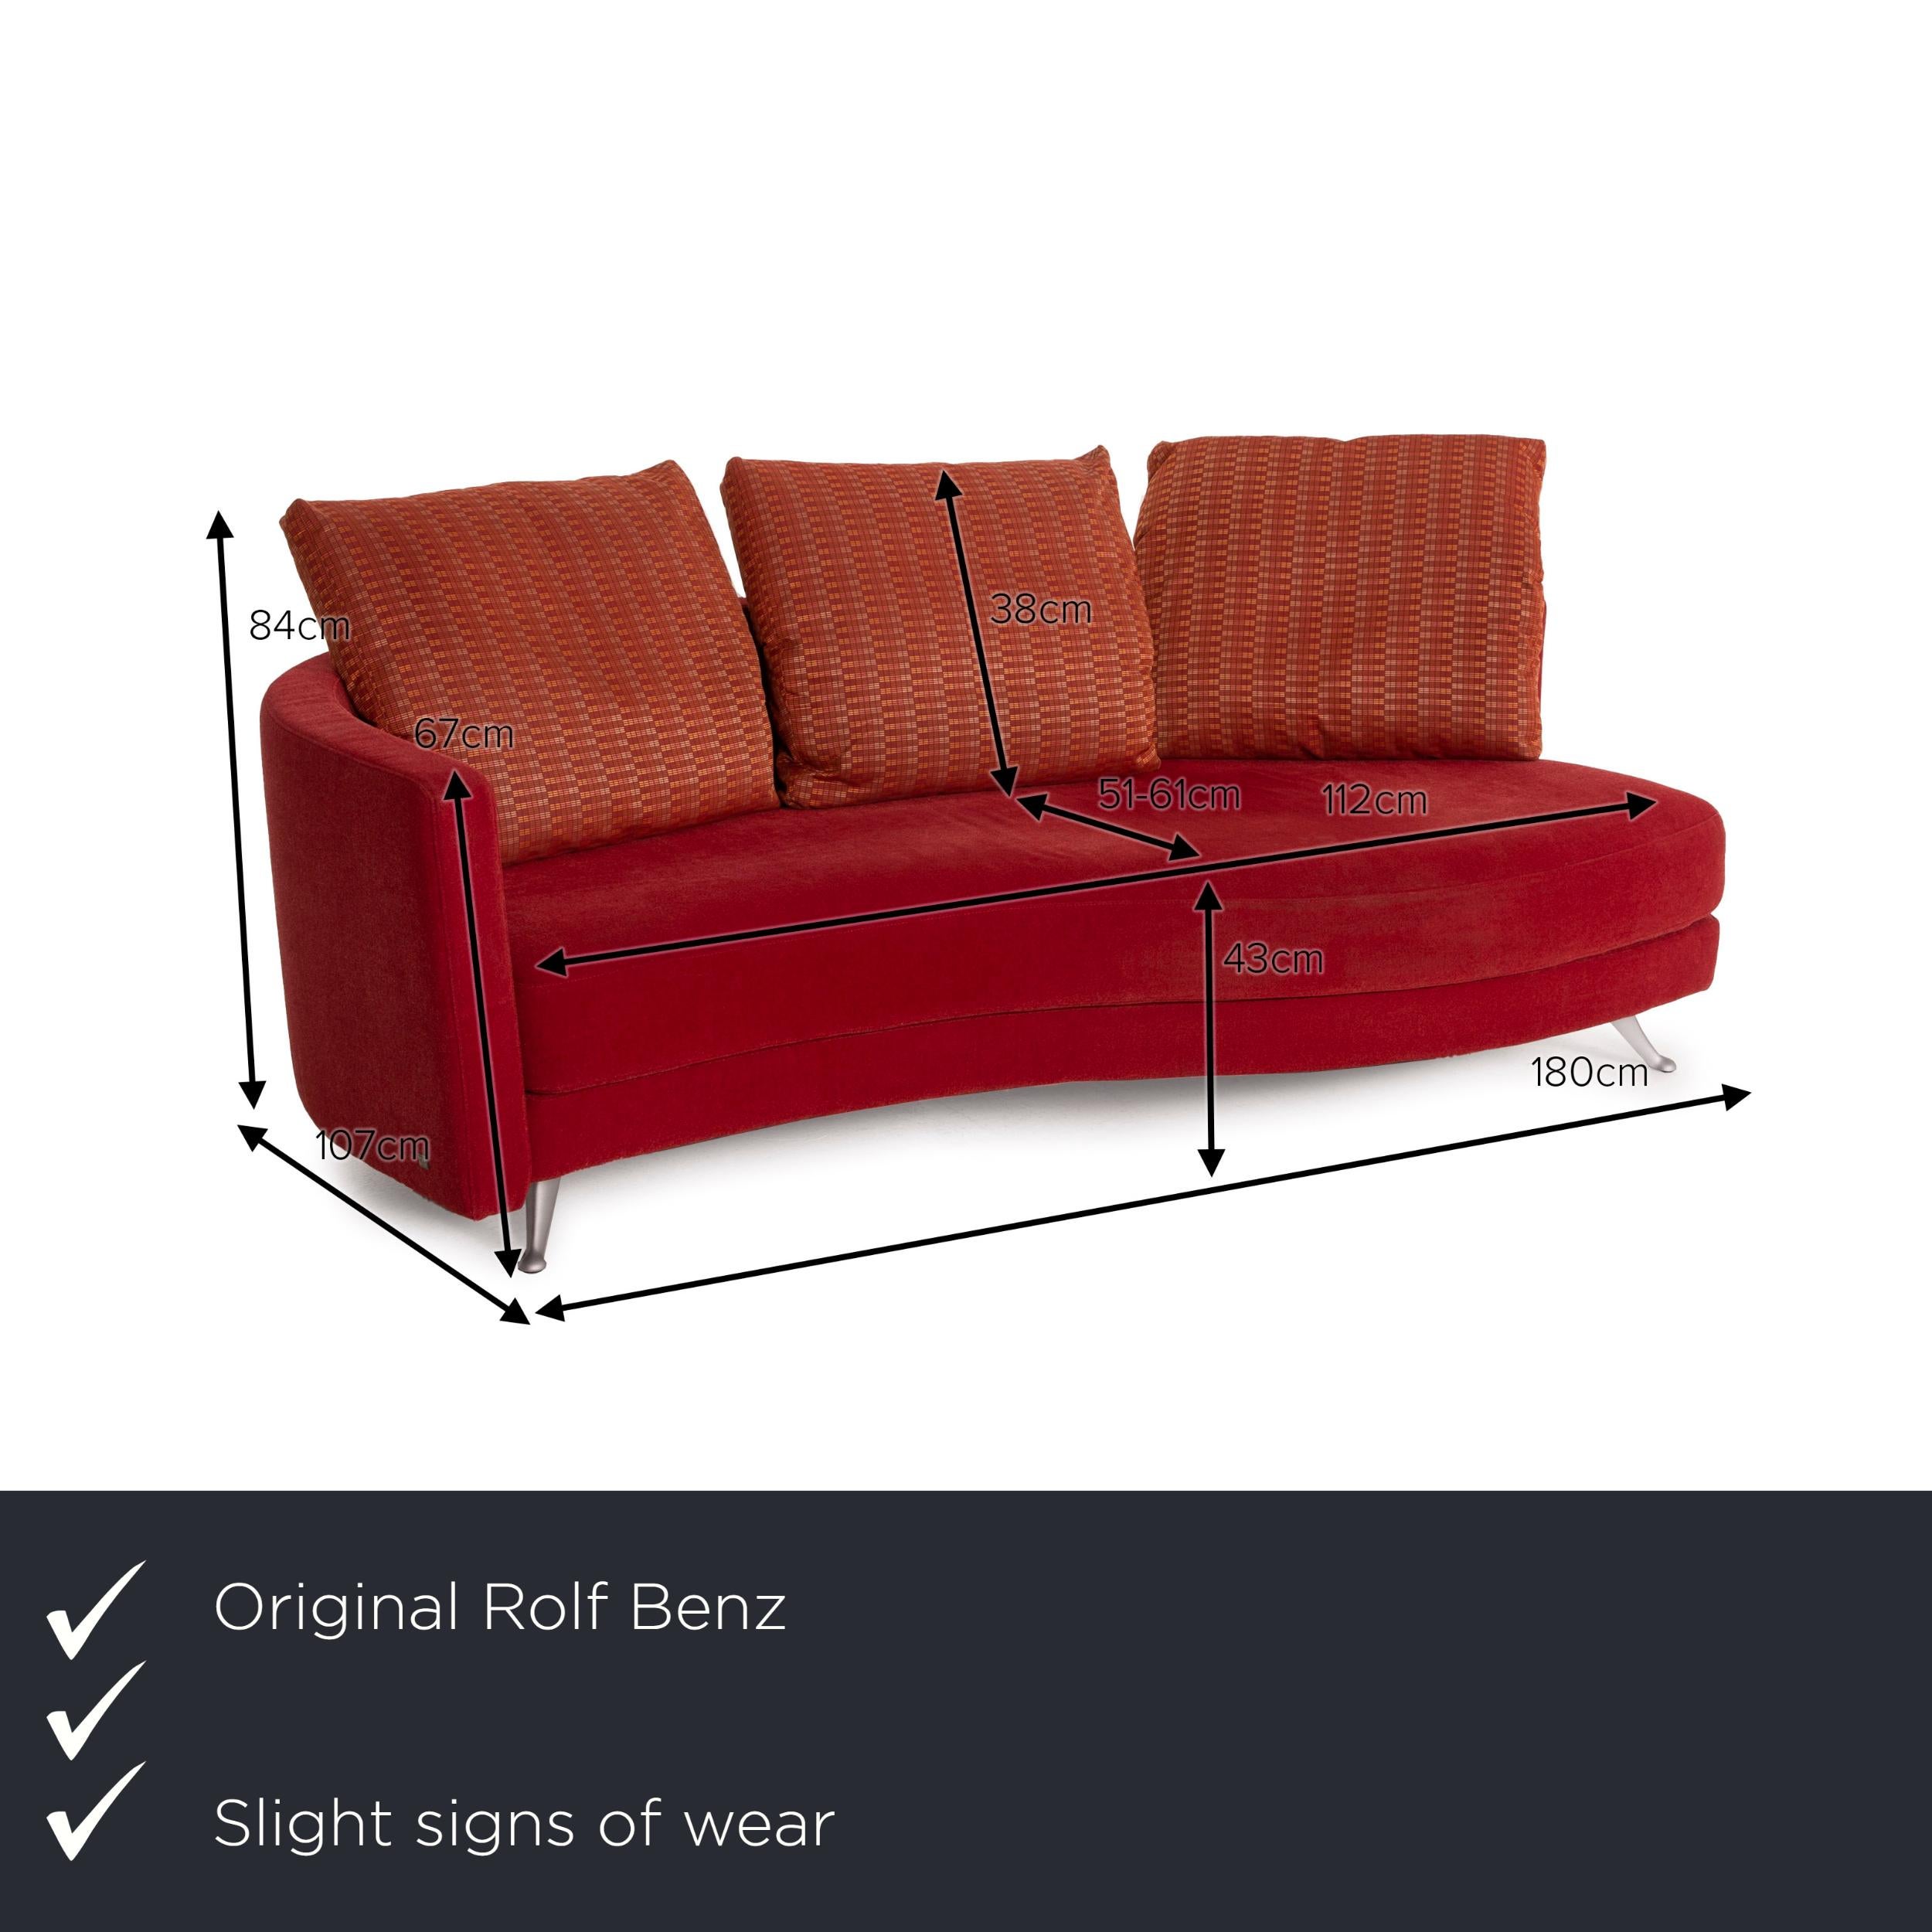 We present to you a Rolf Benz 2500 red three-seater fabric sofa incl. Ottoman set.


 Product measurements in centimeters:
 

Depth: 107
Width: 112
Height: 84
Seat height: 43
Rest height: 67
Seat depth: 51
Seat width: 180
Back height: